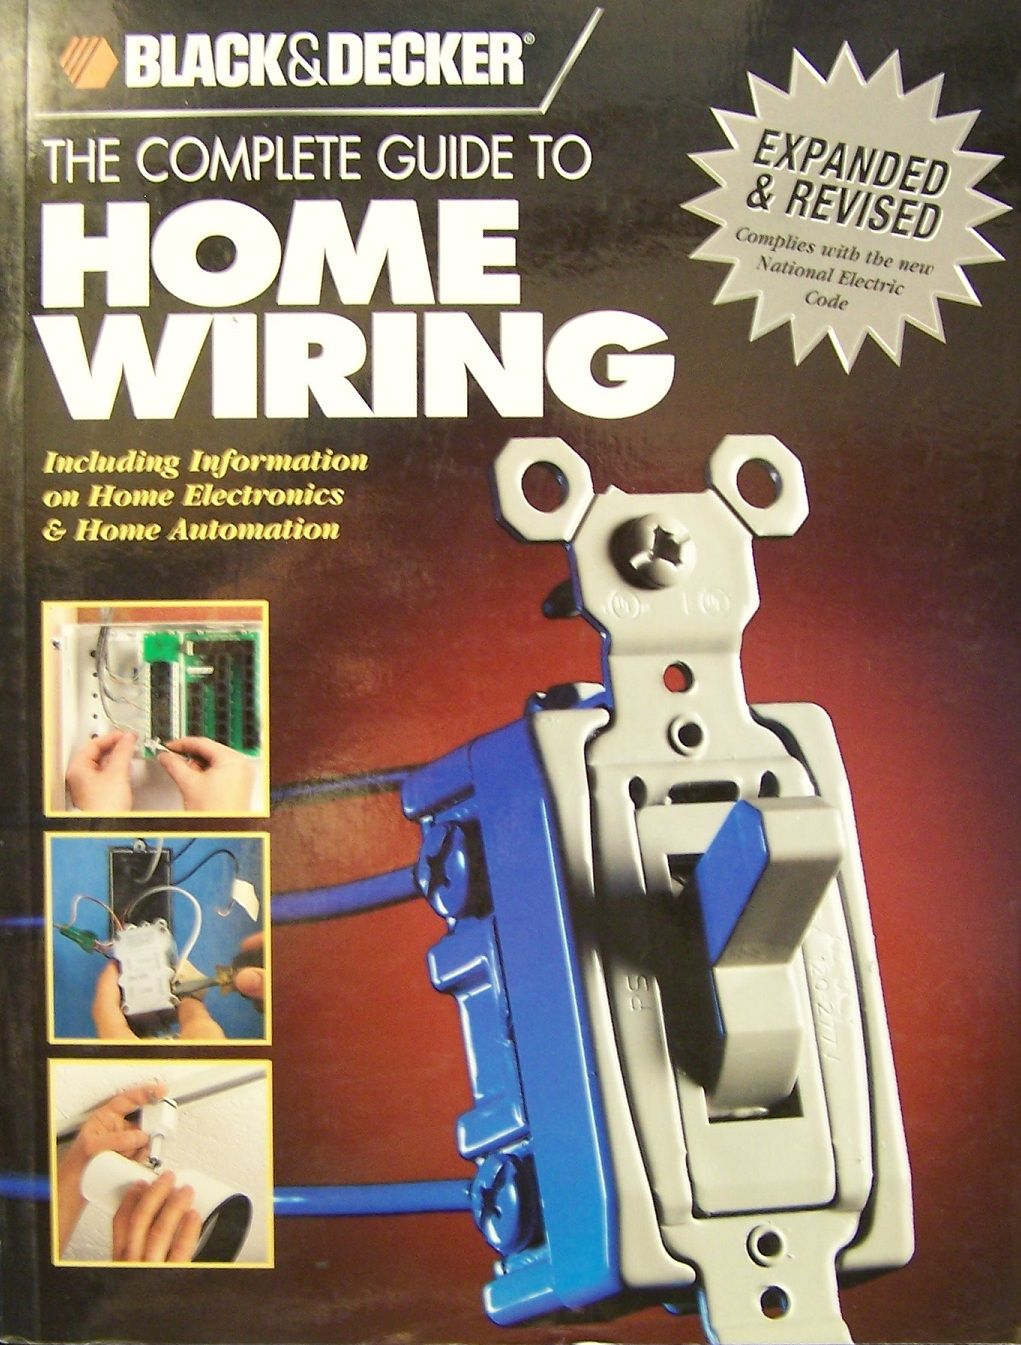  Black & Decker The Complete Guide to Wiring Updated